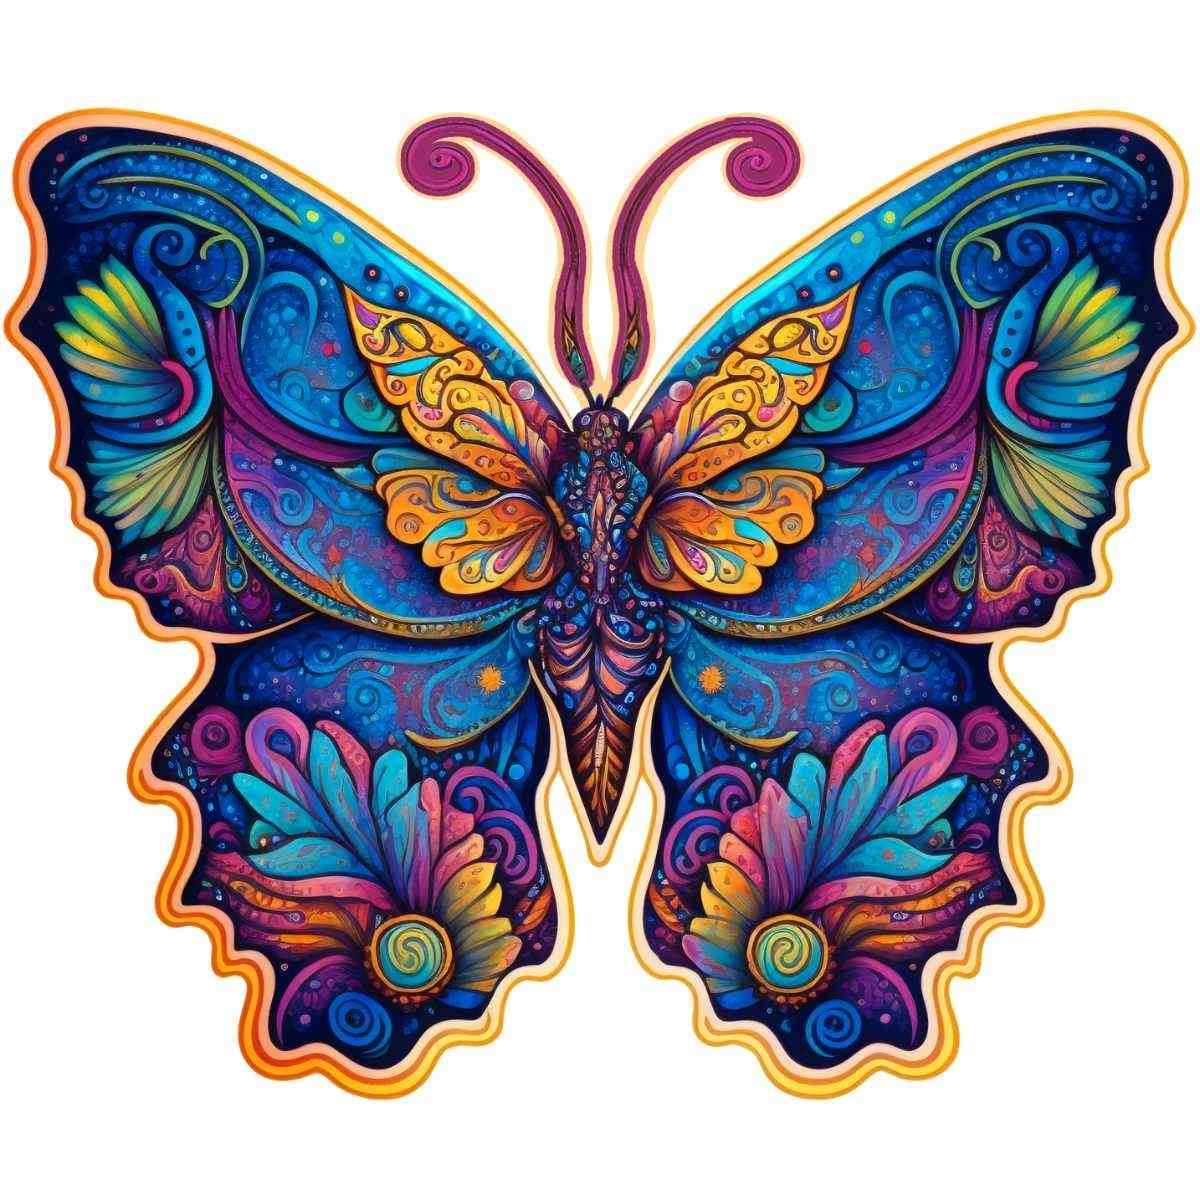 Animal Jigsaw Puzzle > Wooden Jigsaw Puzzle > Jigsaw Puzzle A5 Galaxy Butterfly - Jigsaw Puzzle